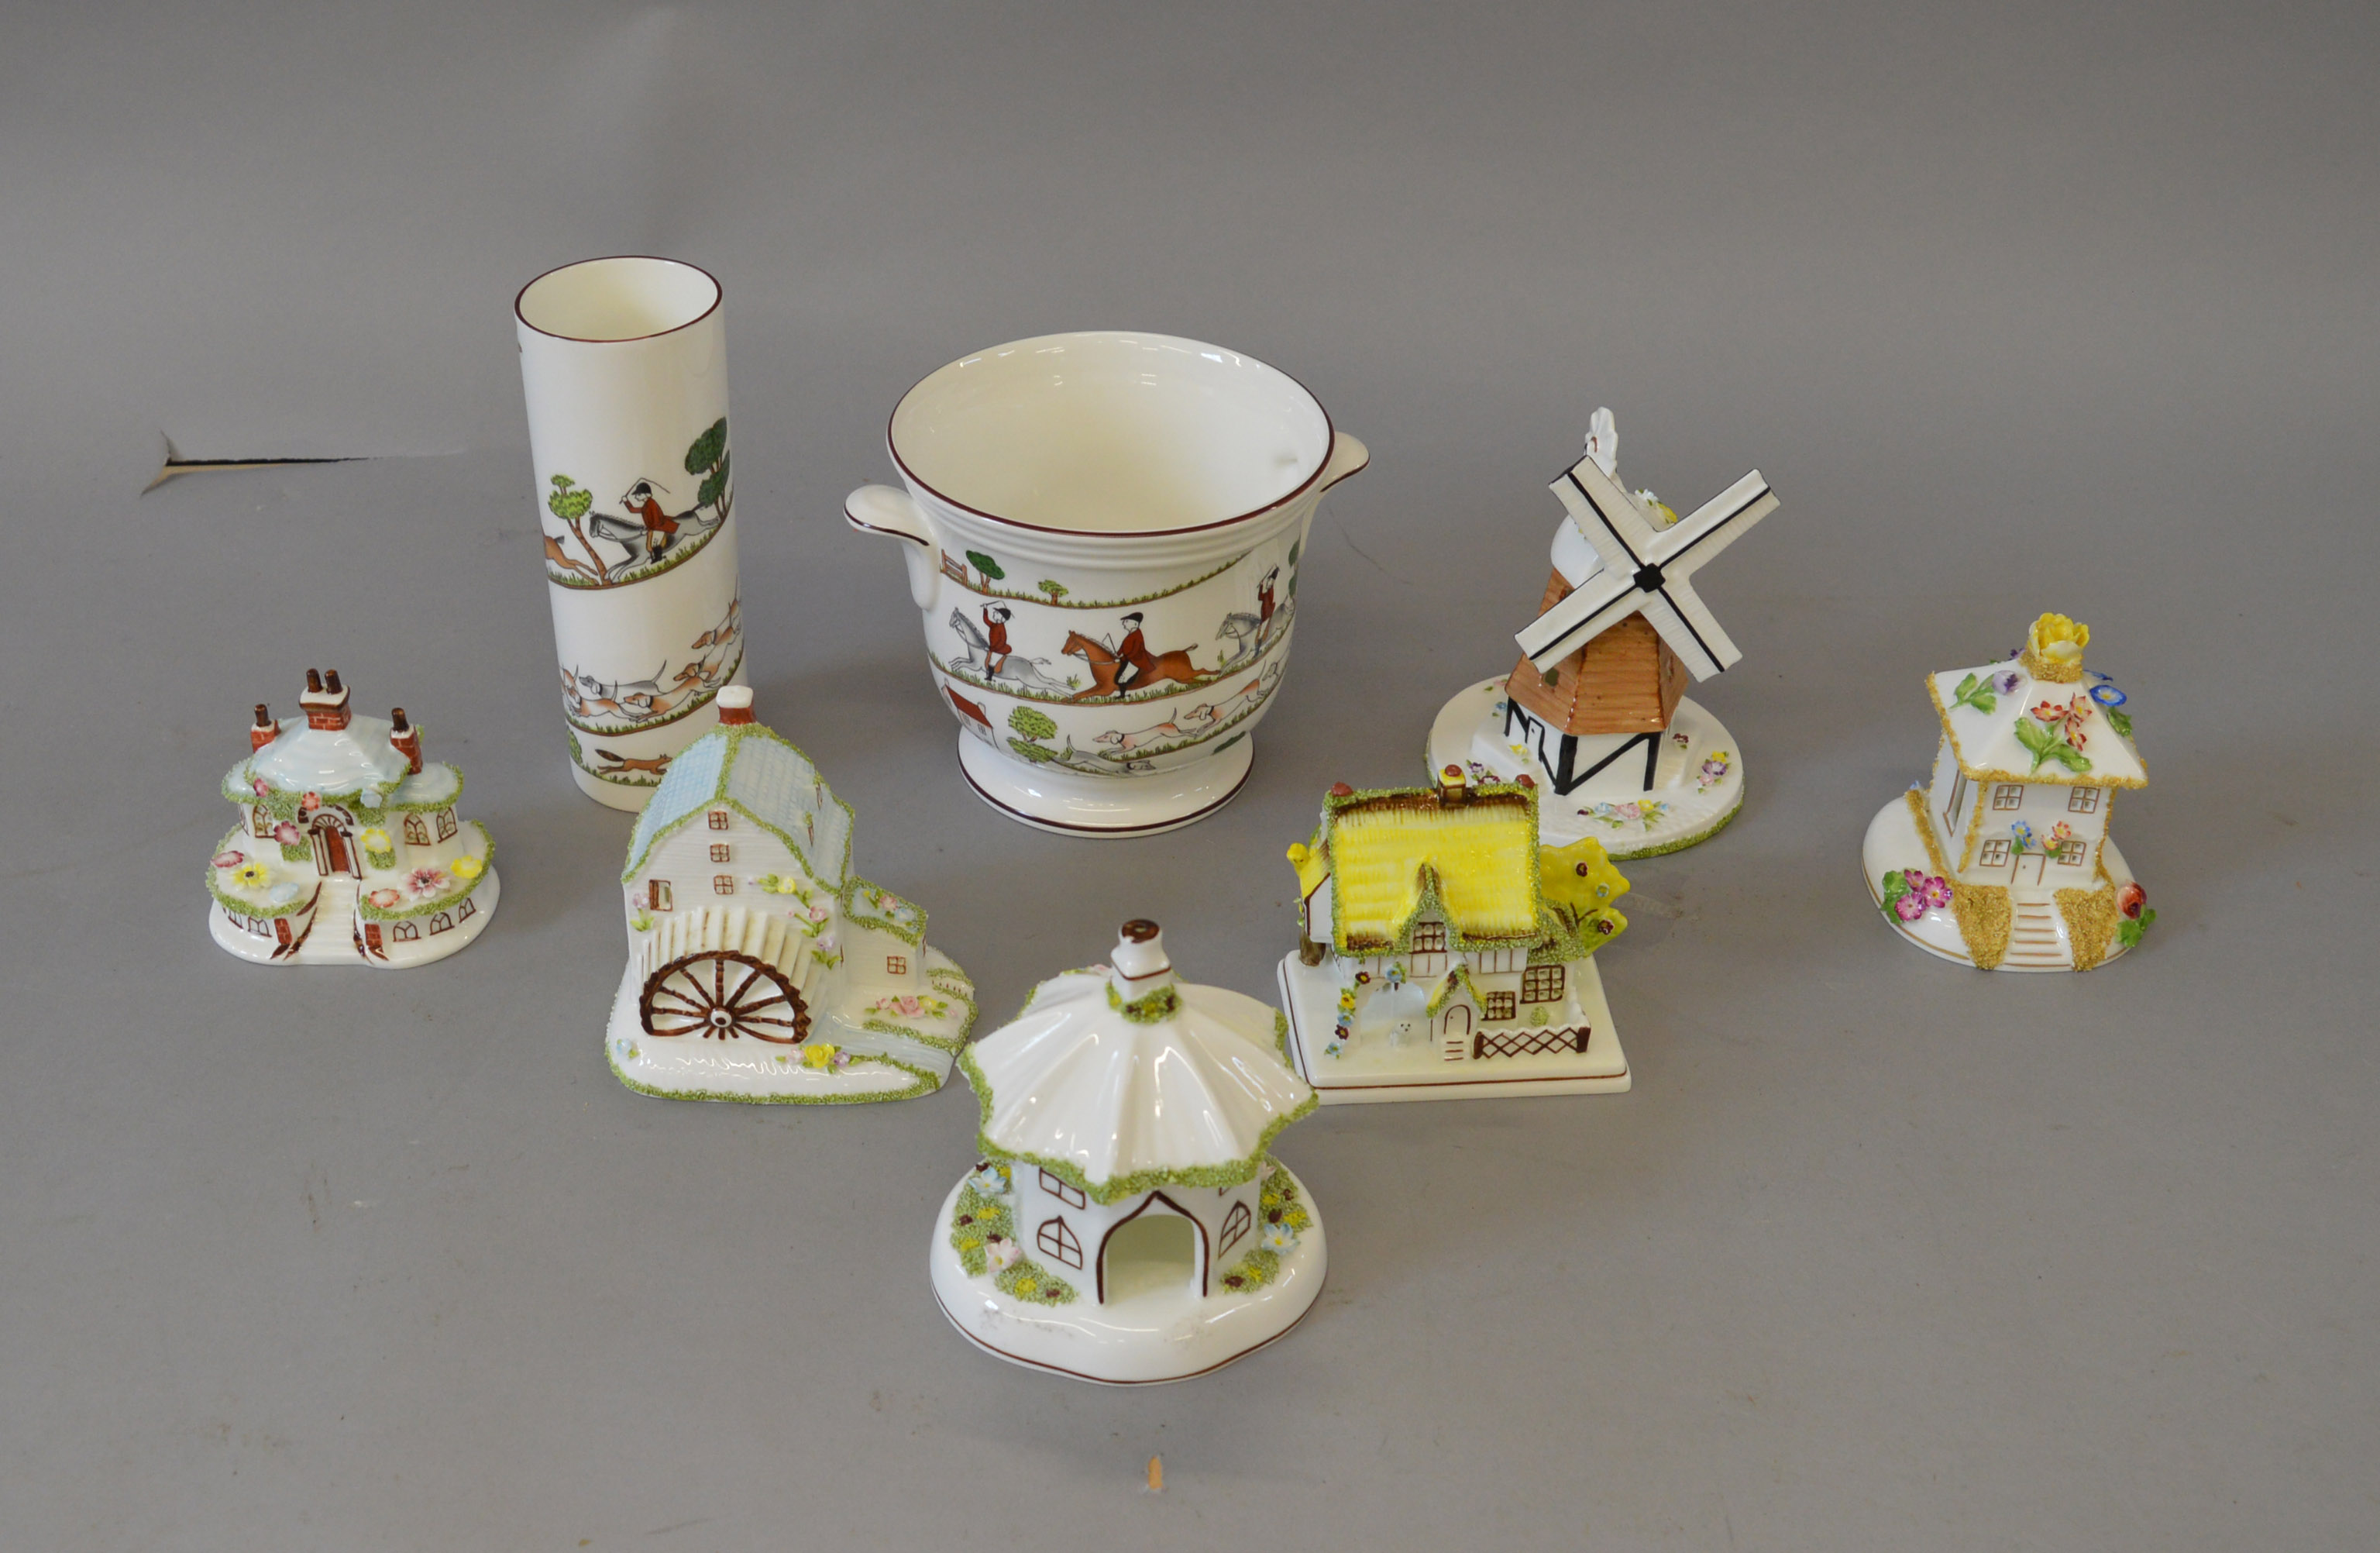 8 Coalport items to include cottages, windmills and two Hunting related items.